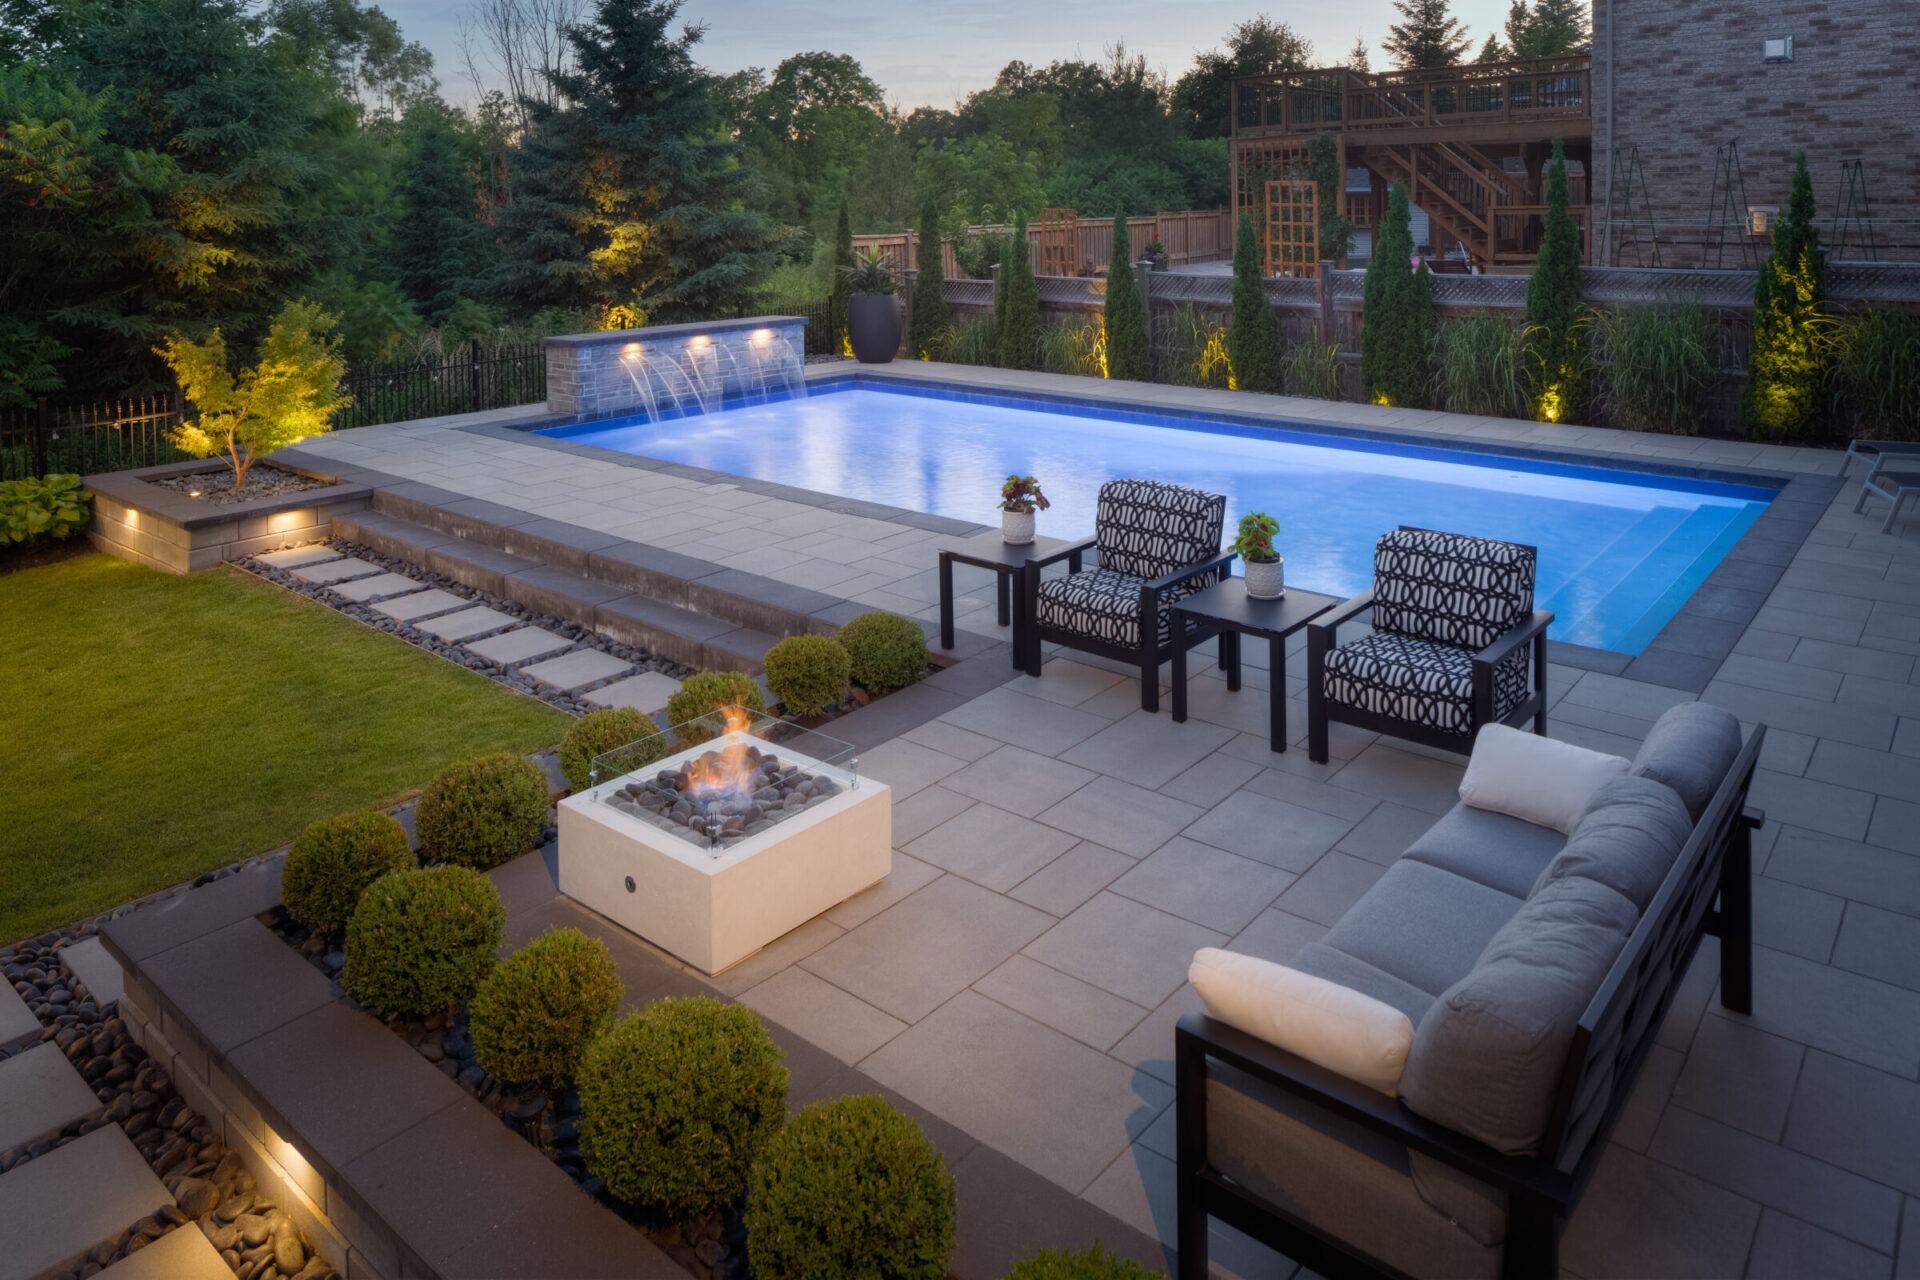 This image shows a luxury backyard at dusk with a lit swimming pool, stylish outdoor furniture, a fire pit, landscaping, and a wooden deck.